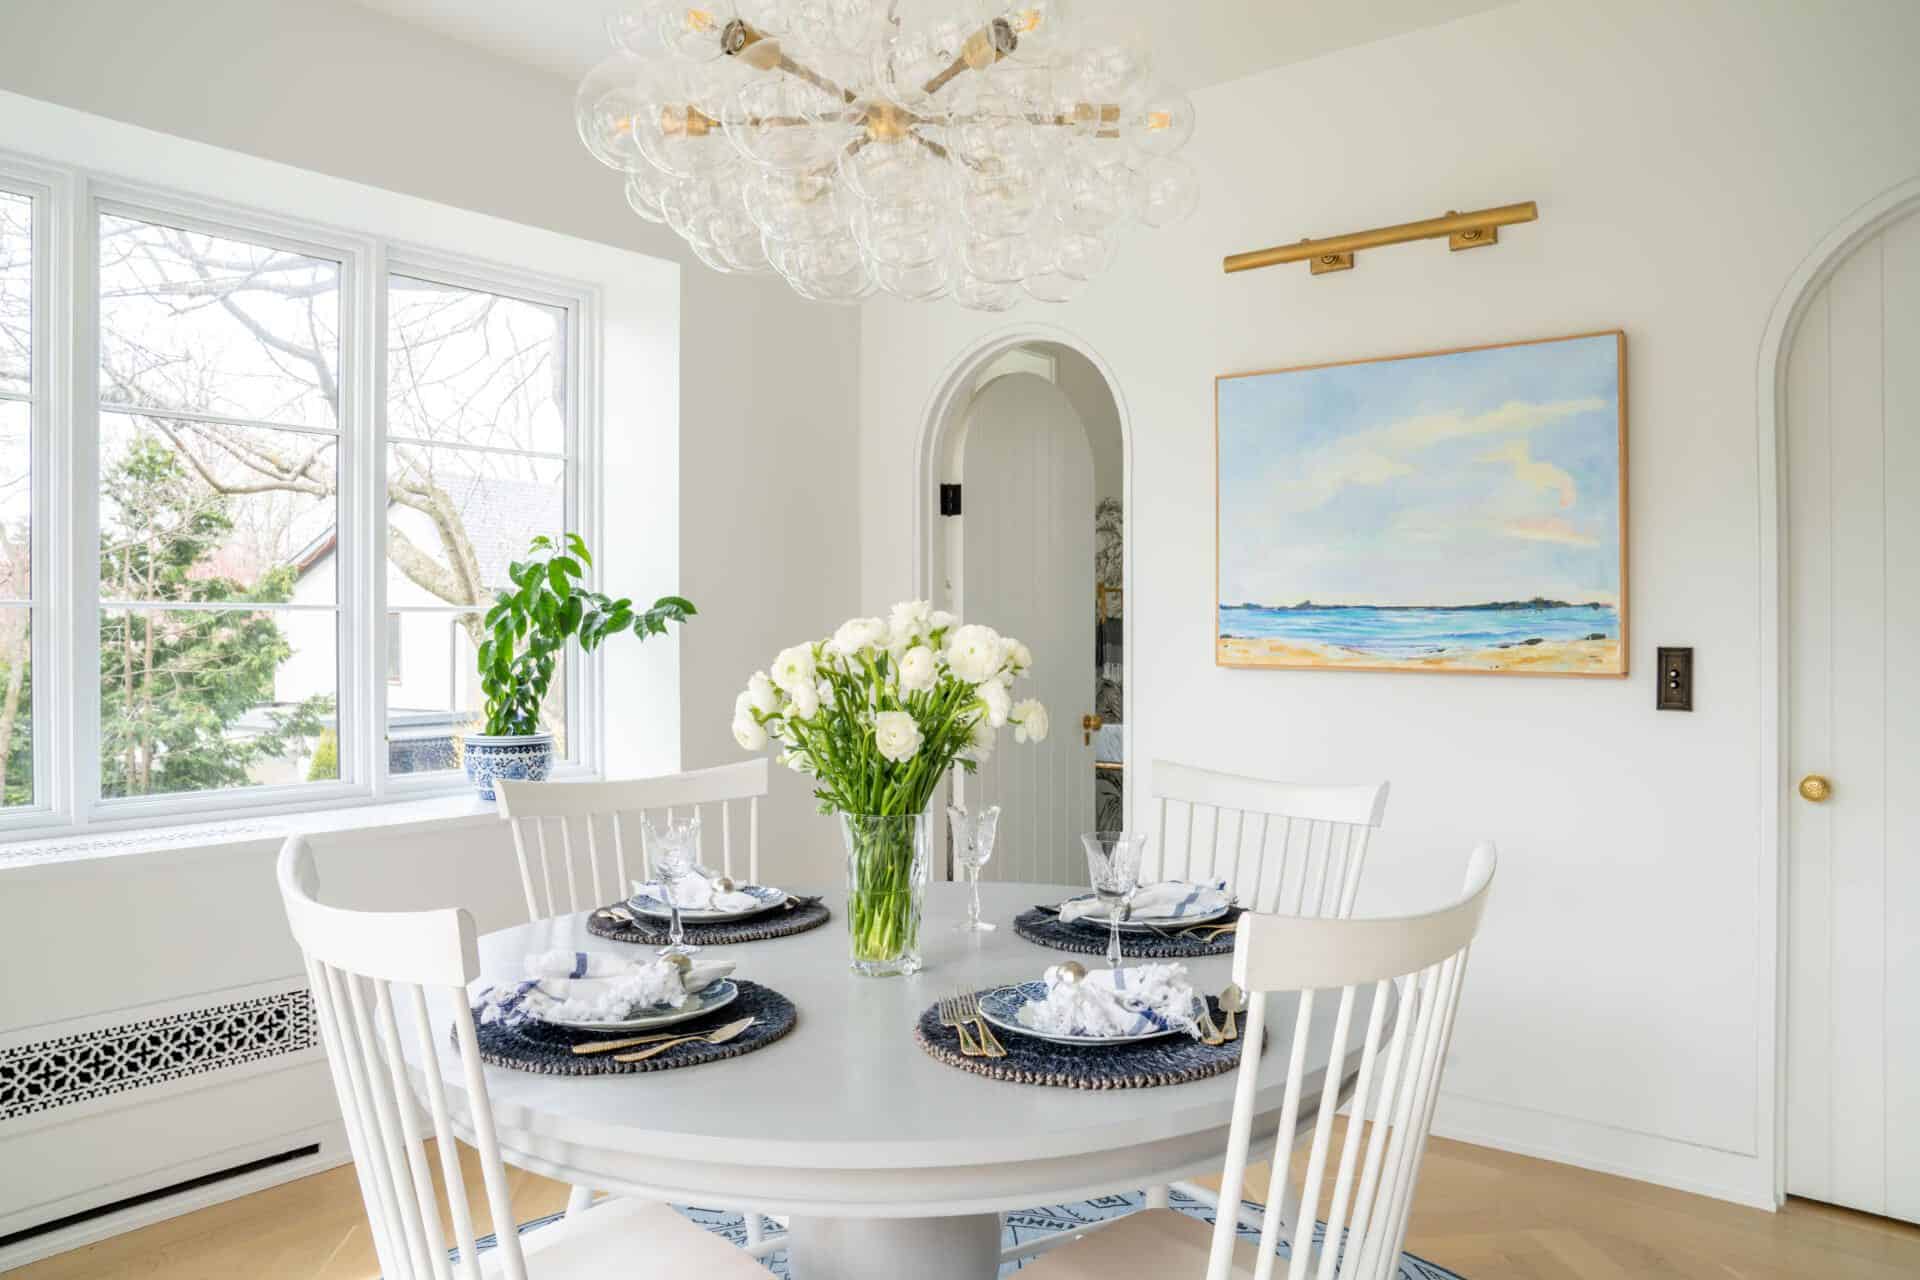 Dining area with white chairs, gray circular table, bubble-like light fixture and seascape painting on wall